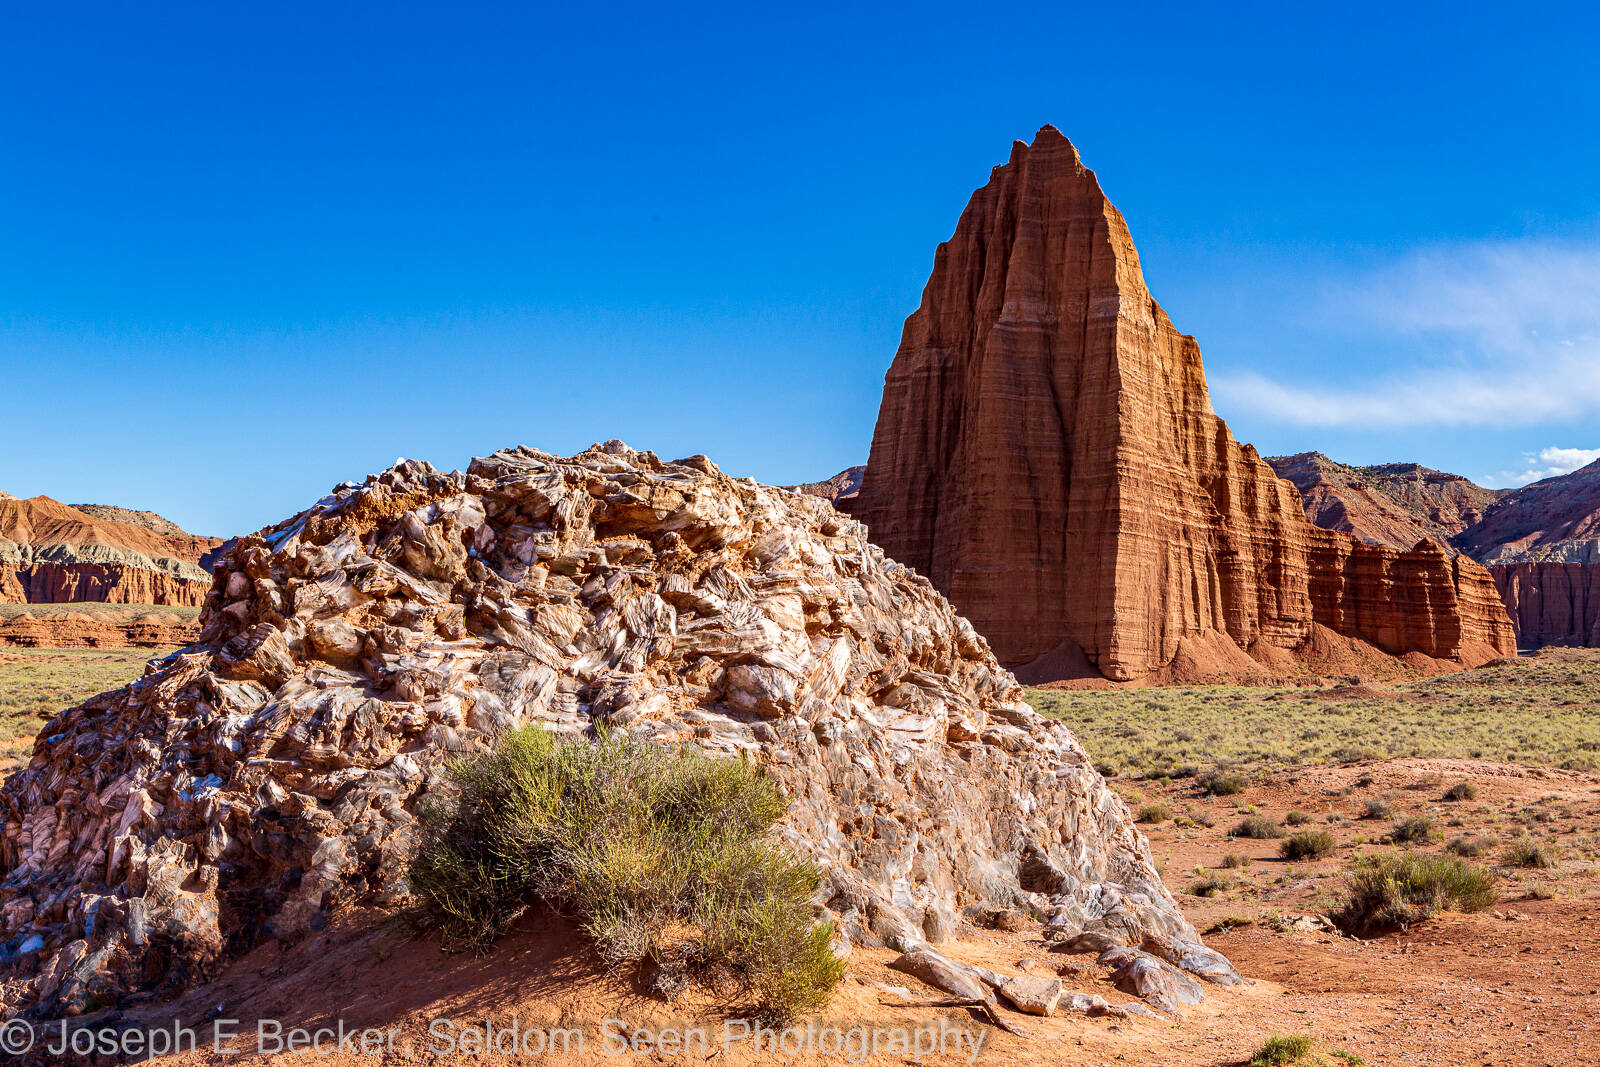 Image of Temple of the Sun from Glass Mountain by Joe Becker